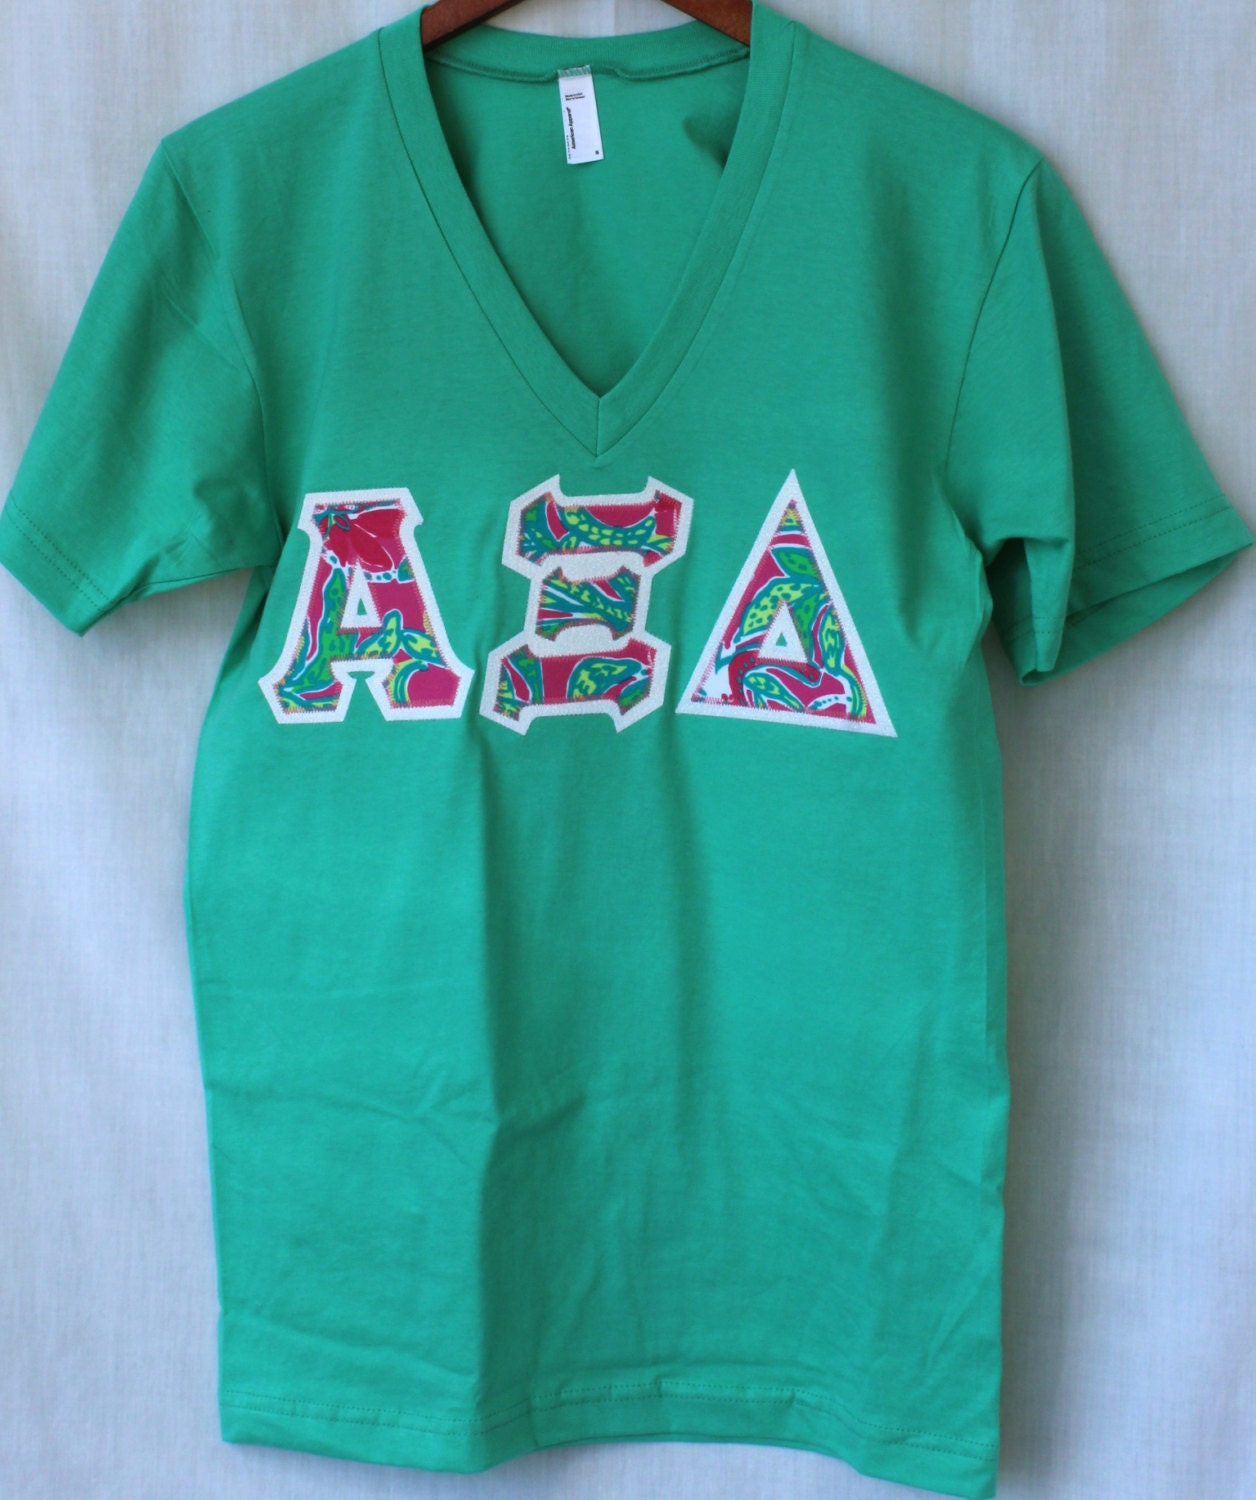 Mint V-Neck With Lilly On White 3C